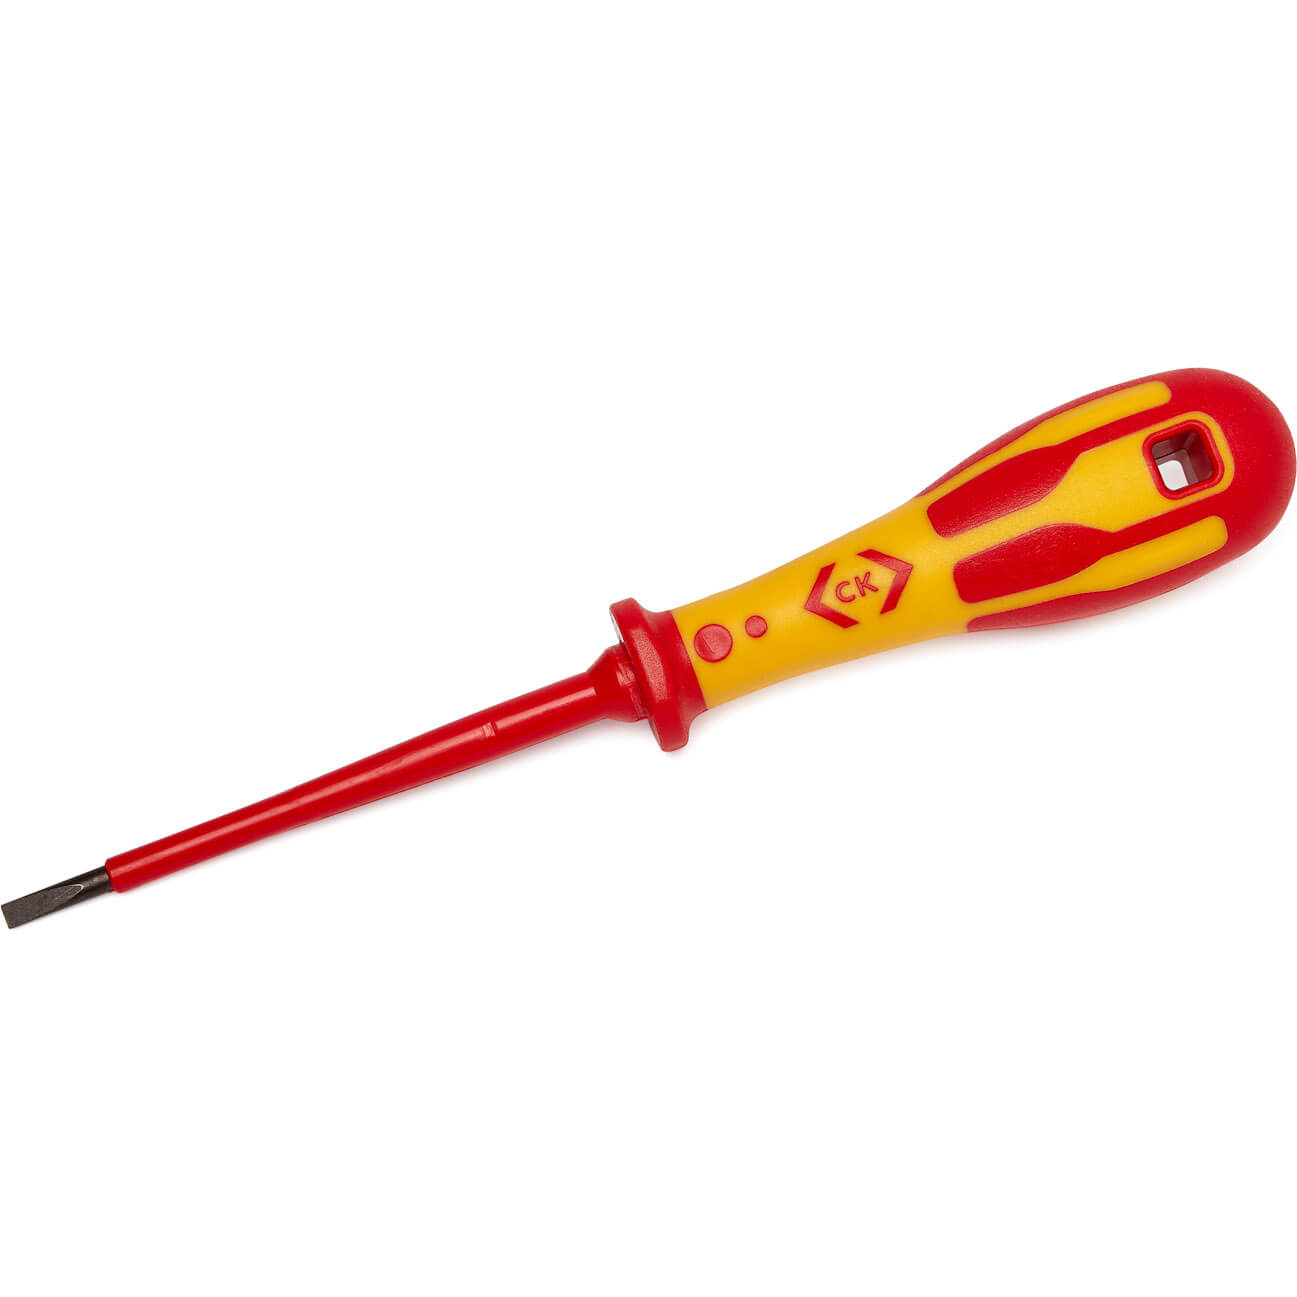 Image of CK Dextro VDE Insulated Parallel Slotted Screwdriver 3.5mm 100mm